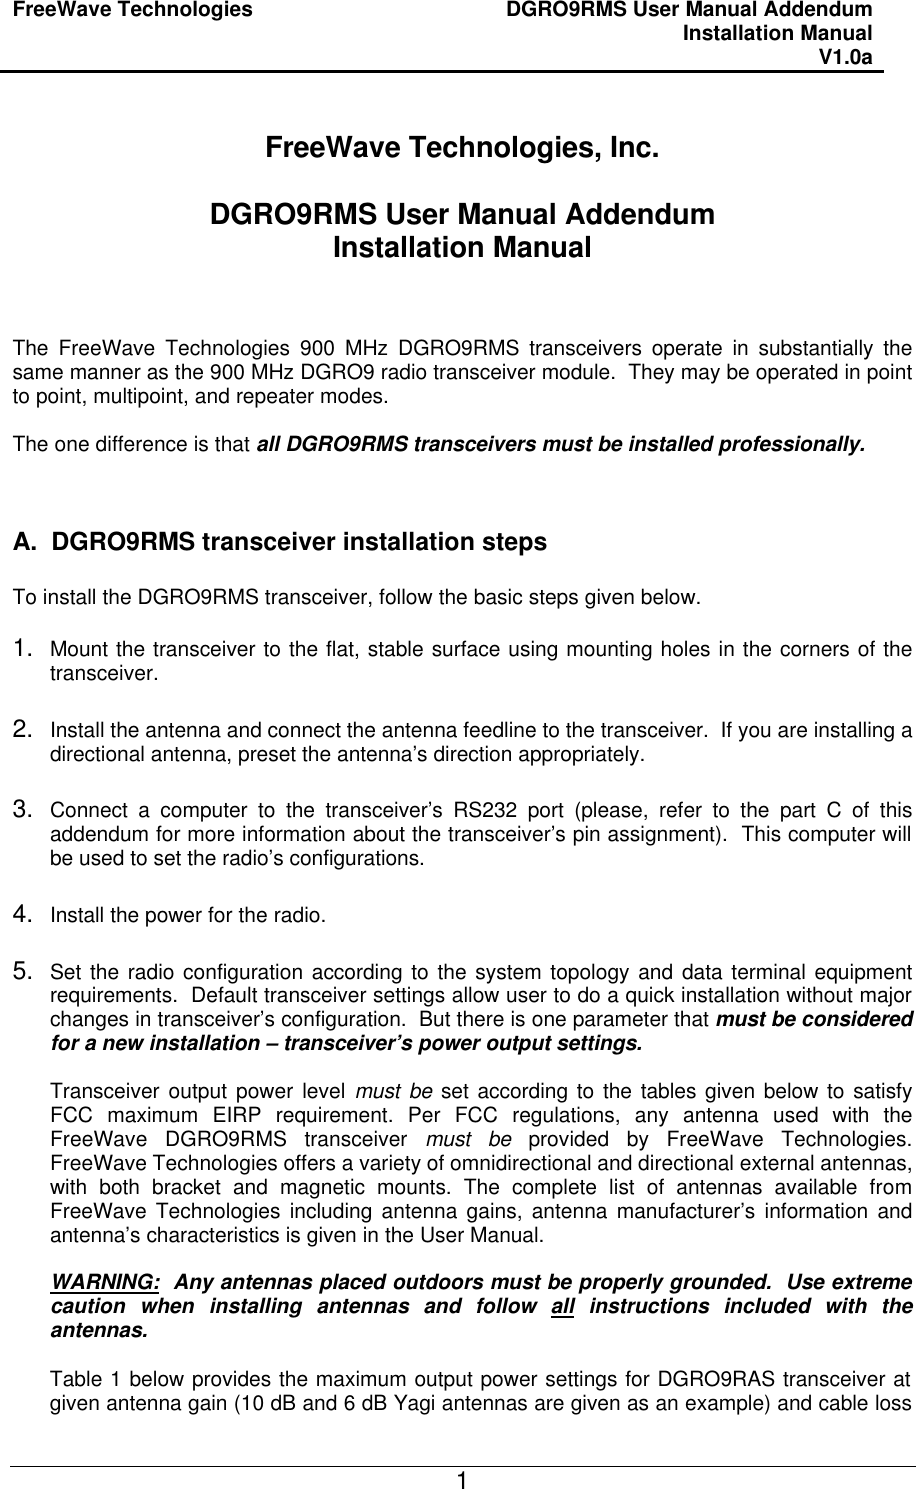 FreeWave Technologies DGRO9RMS User Manual Addendum Installation Manual V1.0a   1 FreeWave Technologies, Inc.  DGRO9RMS User Manual Addendum Installation Manual    The FreeWave Technologies 900 MHz DGRO9RMS transceivers operate in substantially the same manner as the 900 MHz DGRO9 radio transceiver module.  They may be operated in point to point, multipoint, and repeater modes.  The one difference is that all DGRO9RMS transceivers must be installed professionally.    A.  DGRO9RMS transceiver installation steps  To install the DGRO9RMS transceiver, follow the basic steps given below.  1. Mount the transceiver to the flat, stable surface using mounting holes in the corners of the transceiver.  2. Install the antenna and connect the antenna feedline to the transceiver.  If you are installing a directional antenna, preset the antenna’s direction appropriately.  3. Connect a computer to the transceiver’s RS232 port (please, refer to the part C of this addendum for more information about the transceiver’s pin assignment).  This computer will be used to set the radio’s configurations.  4. Install the power for the radio.  5. Set the radio configuration according to the system topology and data terminal equipment requirements.  Default transceiver settings allow user to do a quick installation without major changes in transceiver’s configuration.  But there is one parameter that must be considered for a new installation – transceiver’s power output settings.  Transceiver output power level must be set according to the tables given below to satisfy FCC maximum EIRP requirement. Per FCC regulations, any antenna used with the FreeWave DGRO9RMS transceiver must be provided by FreeWave Technologies.  FreeWave Technologies offers a variety of omnidirectional and directional external antennas, with both bracket and magnetic mounts. The complete list of antennas available from FreeWave Technologies including antenna gains, antenna manufacturer’s information and antenna’s characteristics is given in the User Manual.    WARNING:  Any antennas placed outdoors must be properly grounded.  Use extreme caution when installing antennas and follow all instructions included with the antennas.  Table 1 below provides the maximum output power settings for DGRO9RAS transceiver at given antenna gain (10 dB and 6 dB Yagi antennas are given as an example) and cable loss 